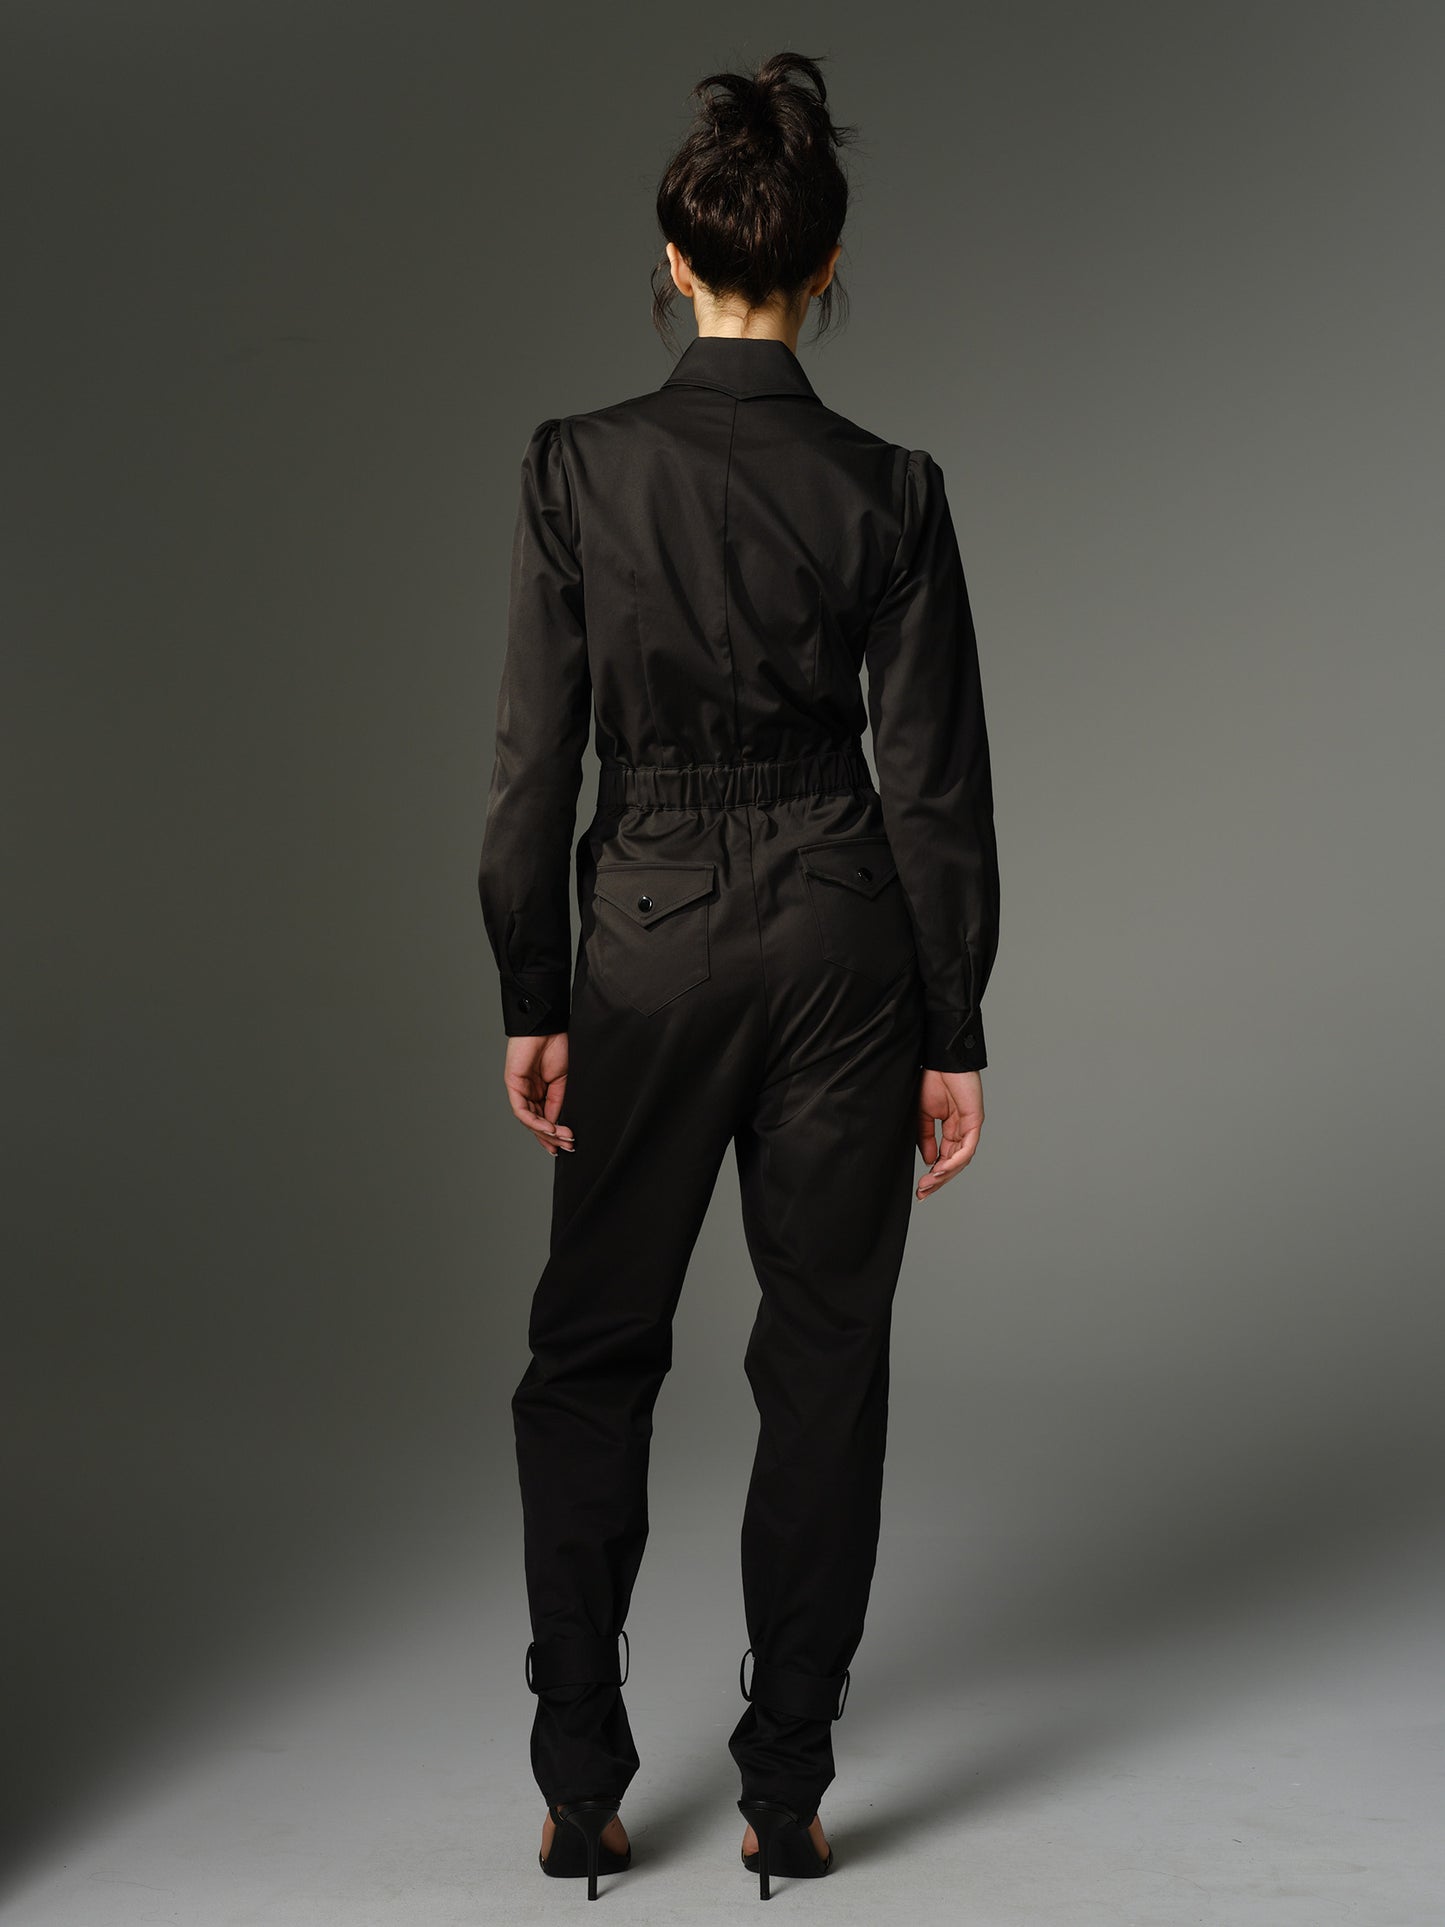 THE WOOLF Jumpsuit - Long Sleeve in Black Cotton Sateen